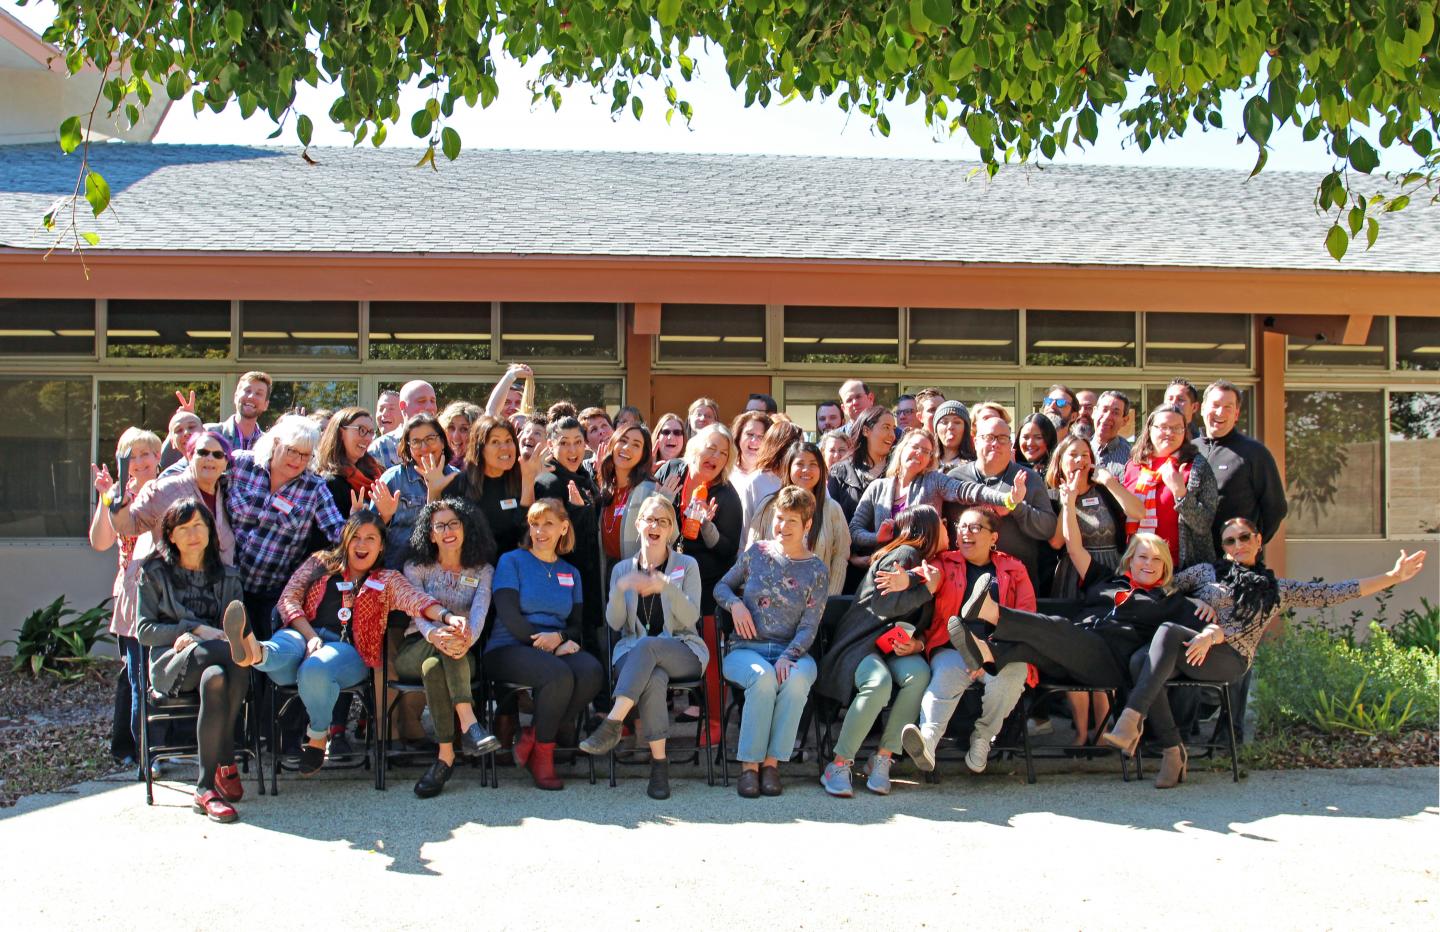 Group photo of VC employees in the Wright Event Center patio on a sunny day and being silly for the photographer.